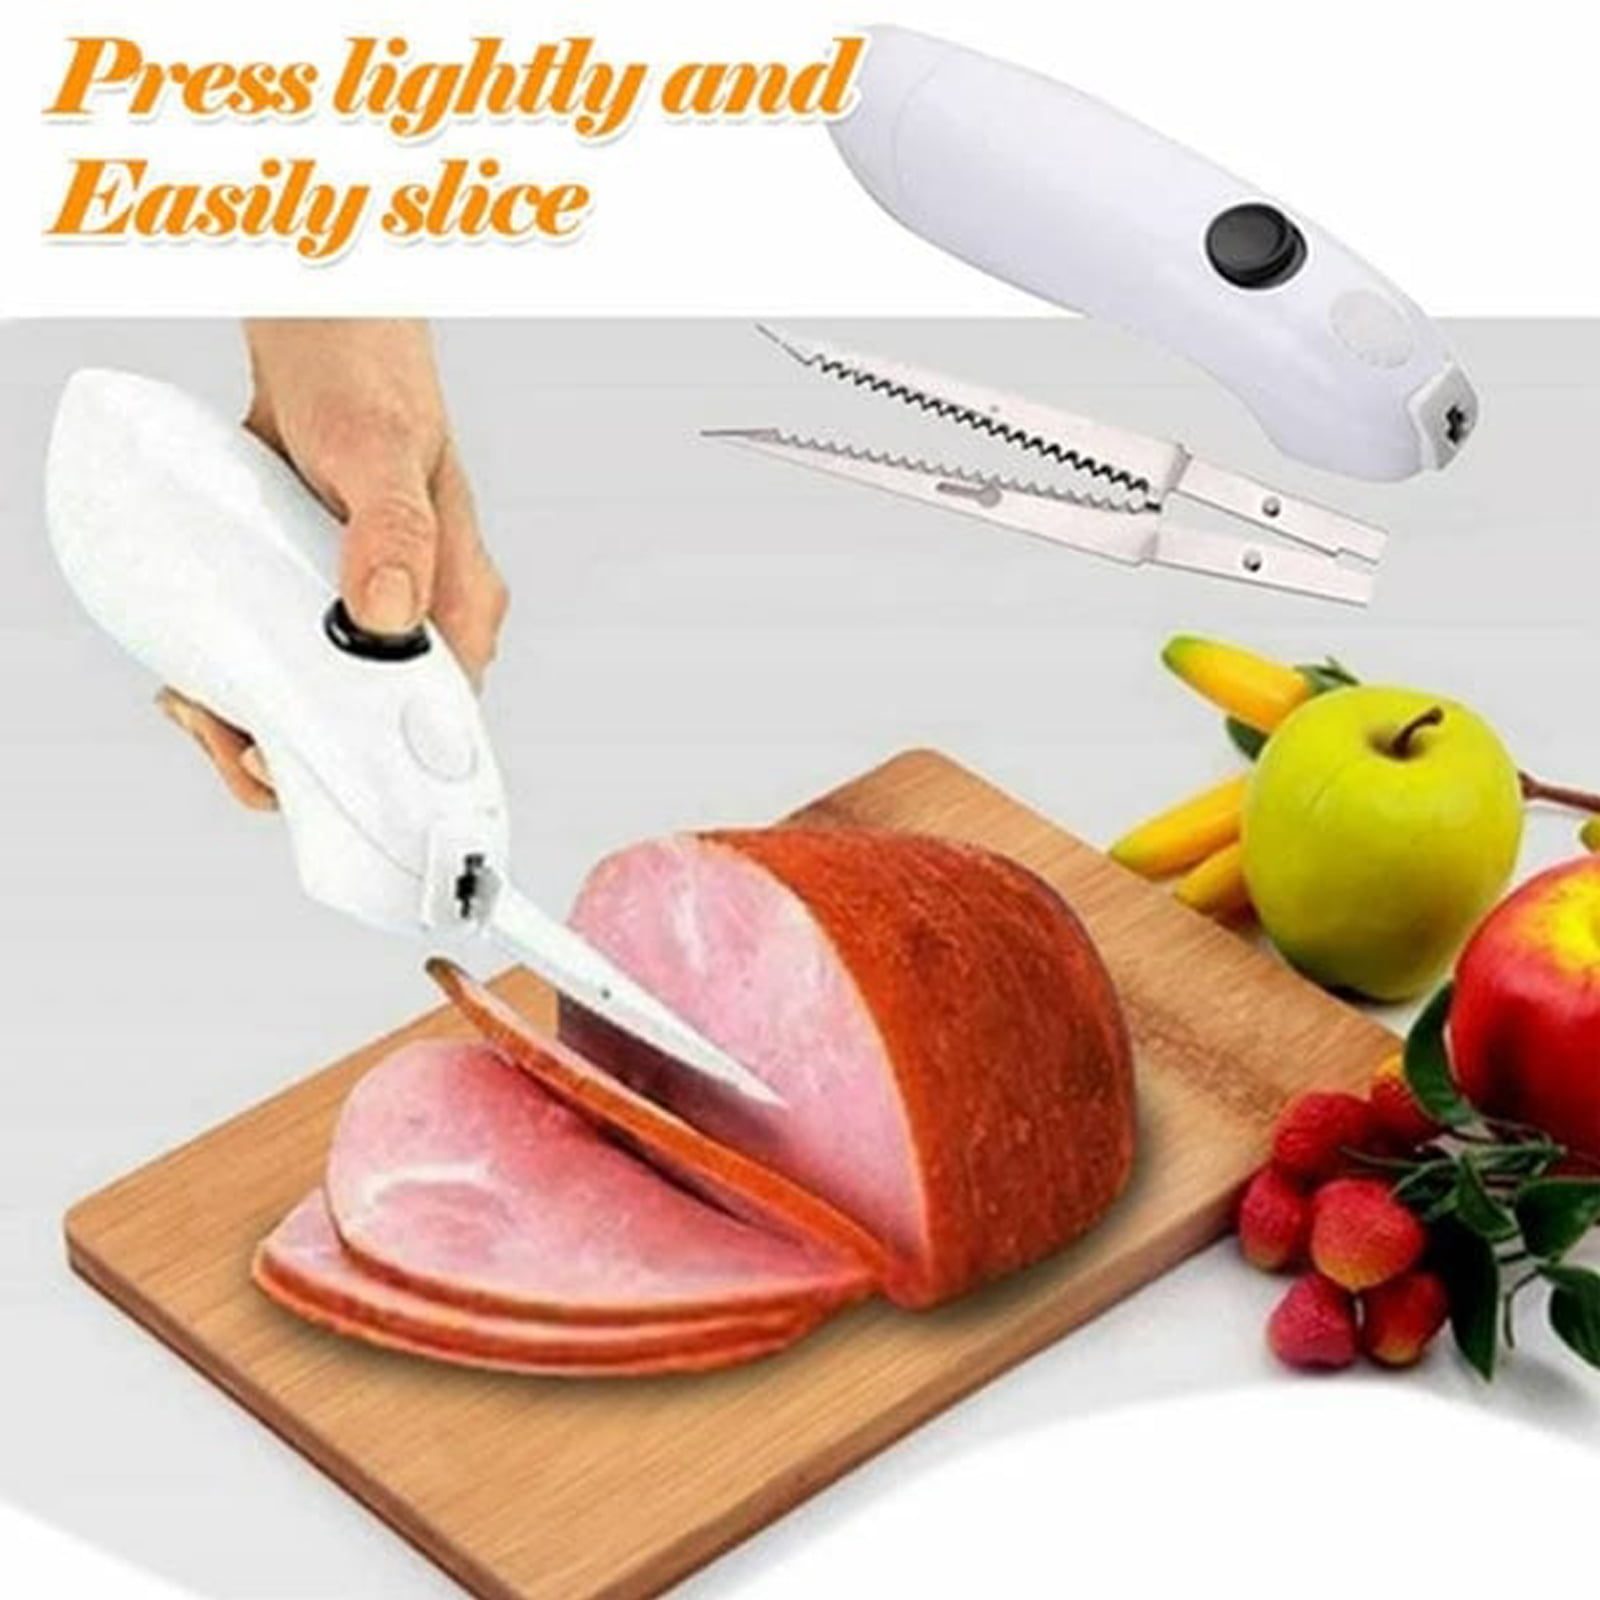 Proctor Silex Easy Slice Electric Knife for Carving Meats, Poultry, Bread,  Crafting Foam and More, Lightweight with Contoured Grip, White